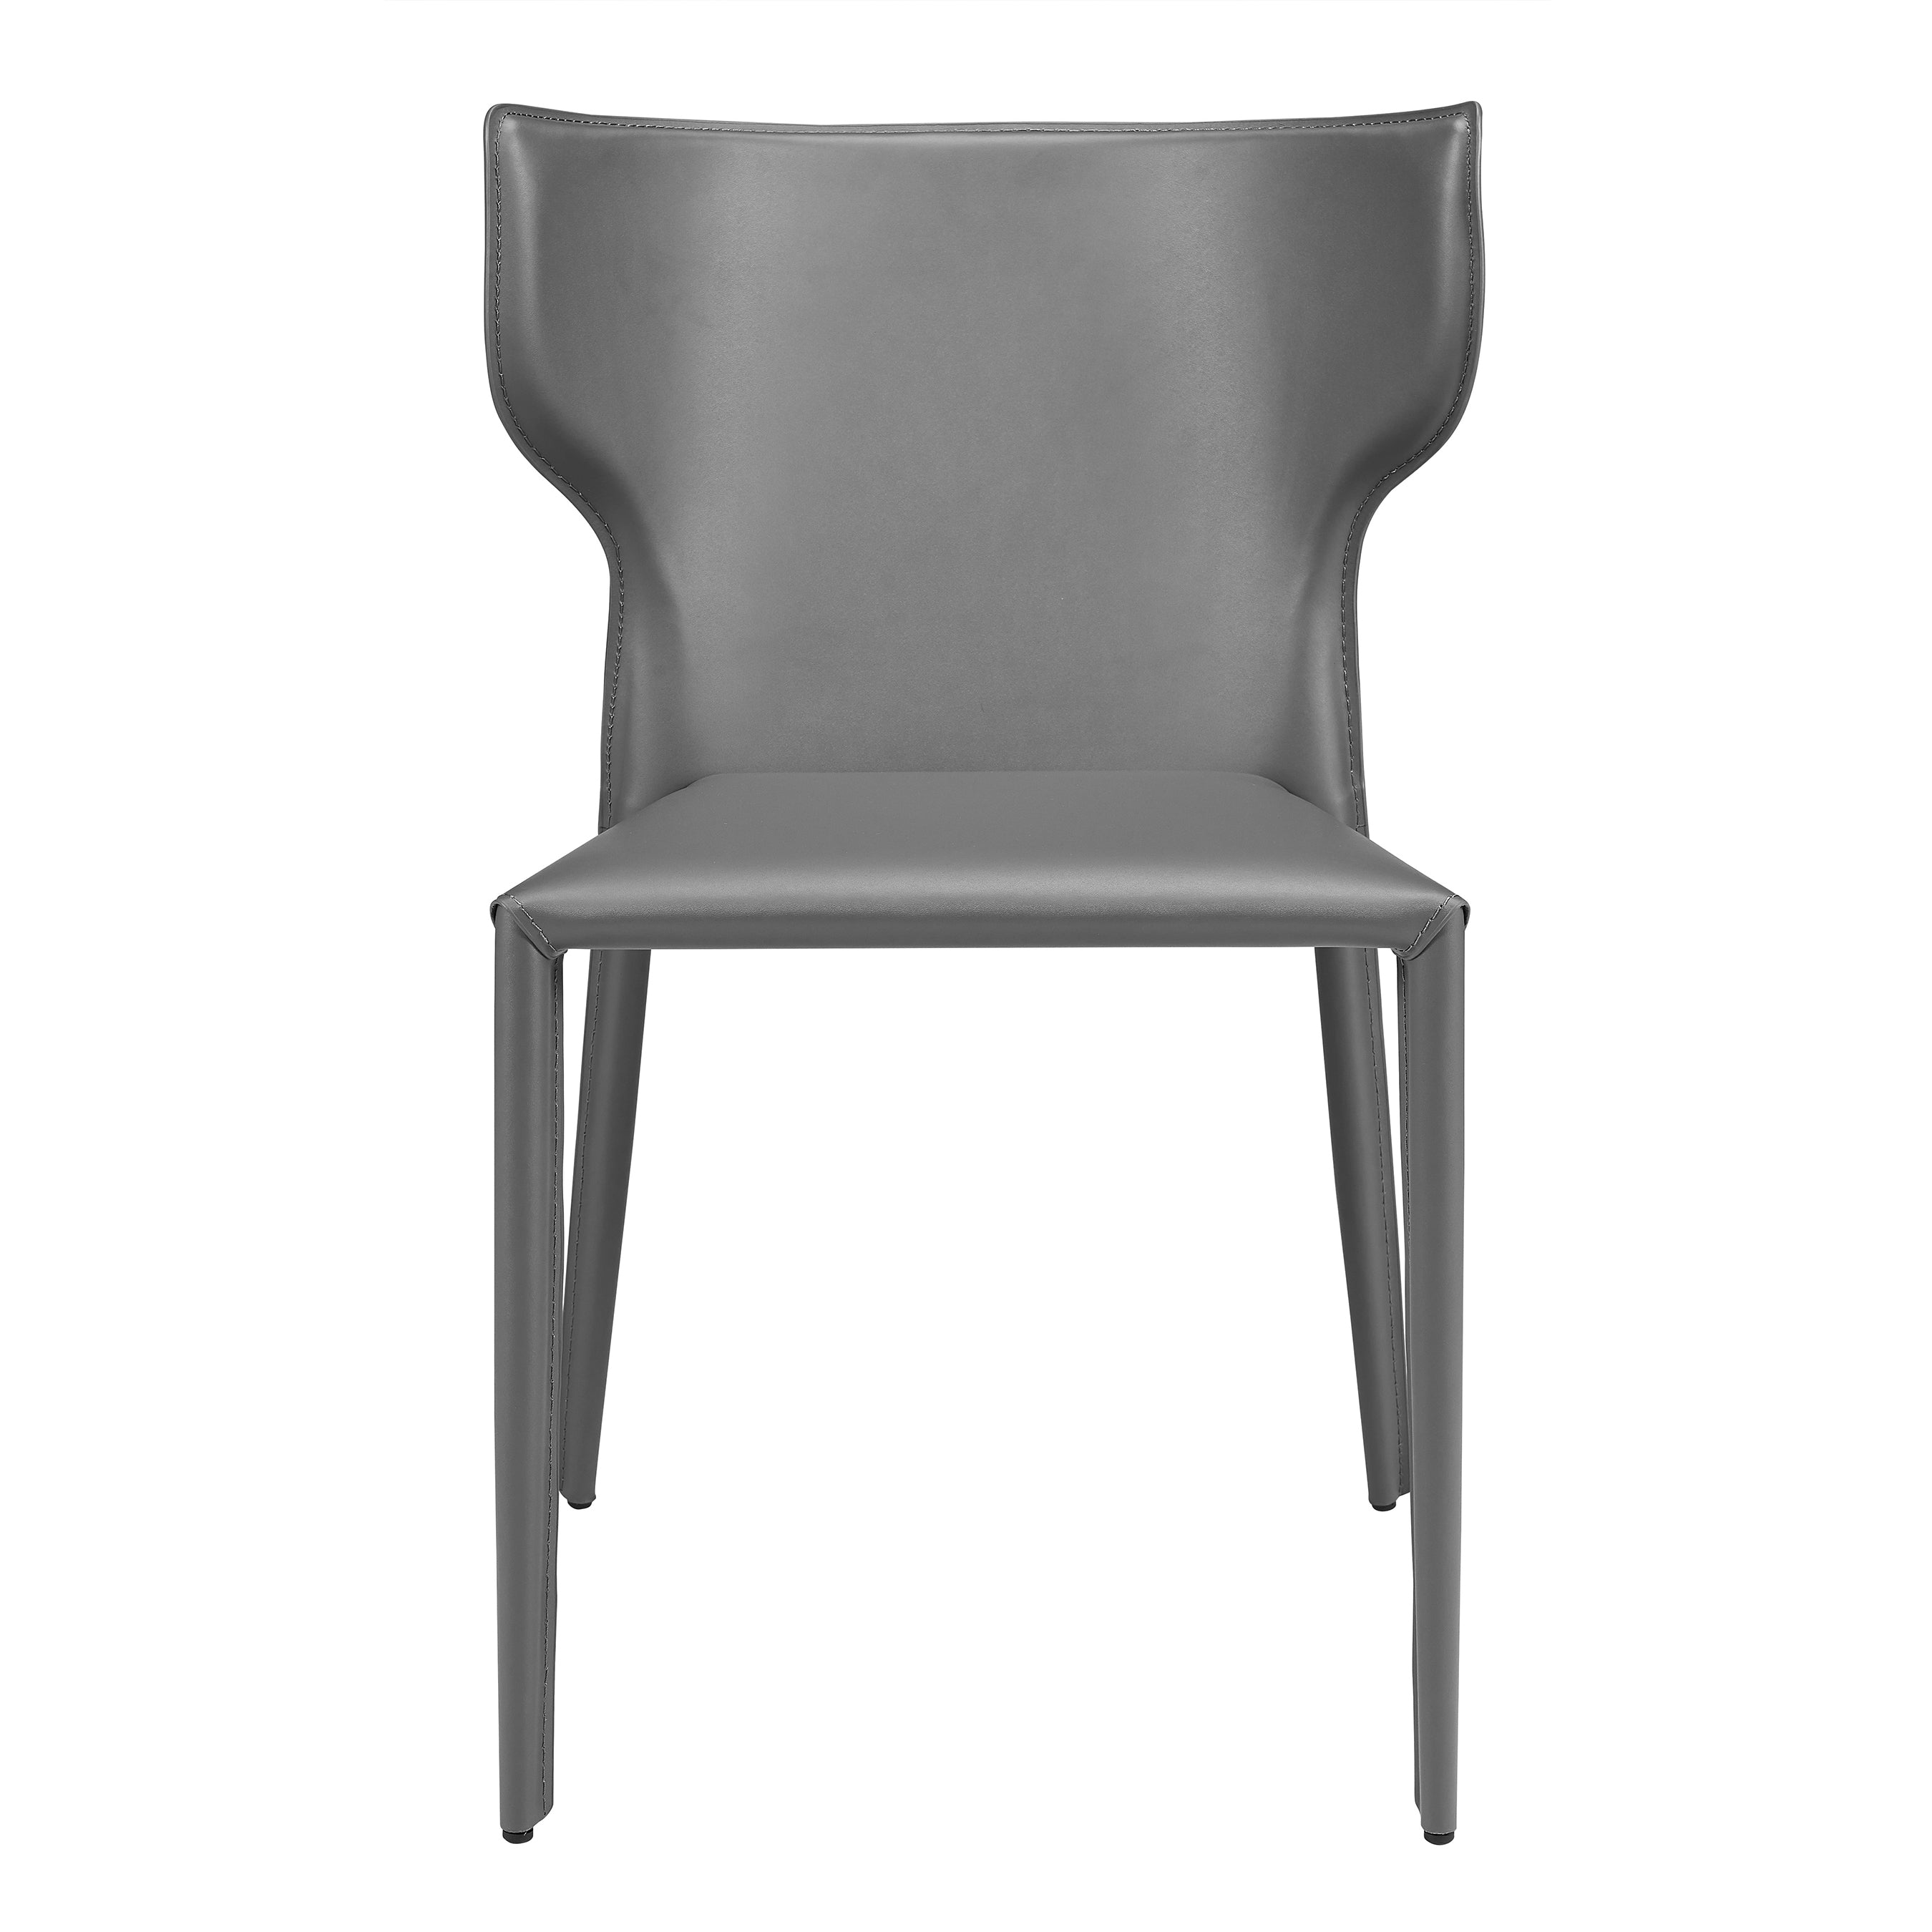 Euro Style Dining Chairs - Divinia Stacking Side Chair in Gray - Set of 2